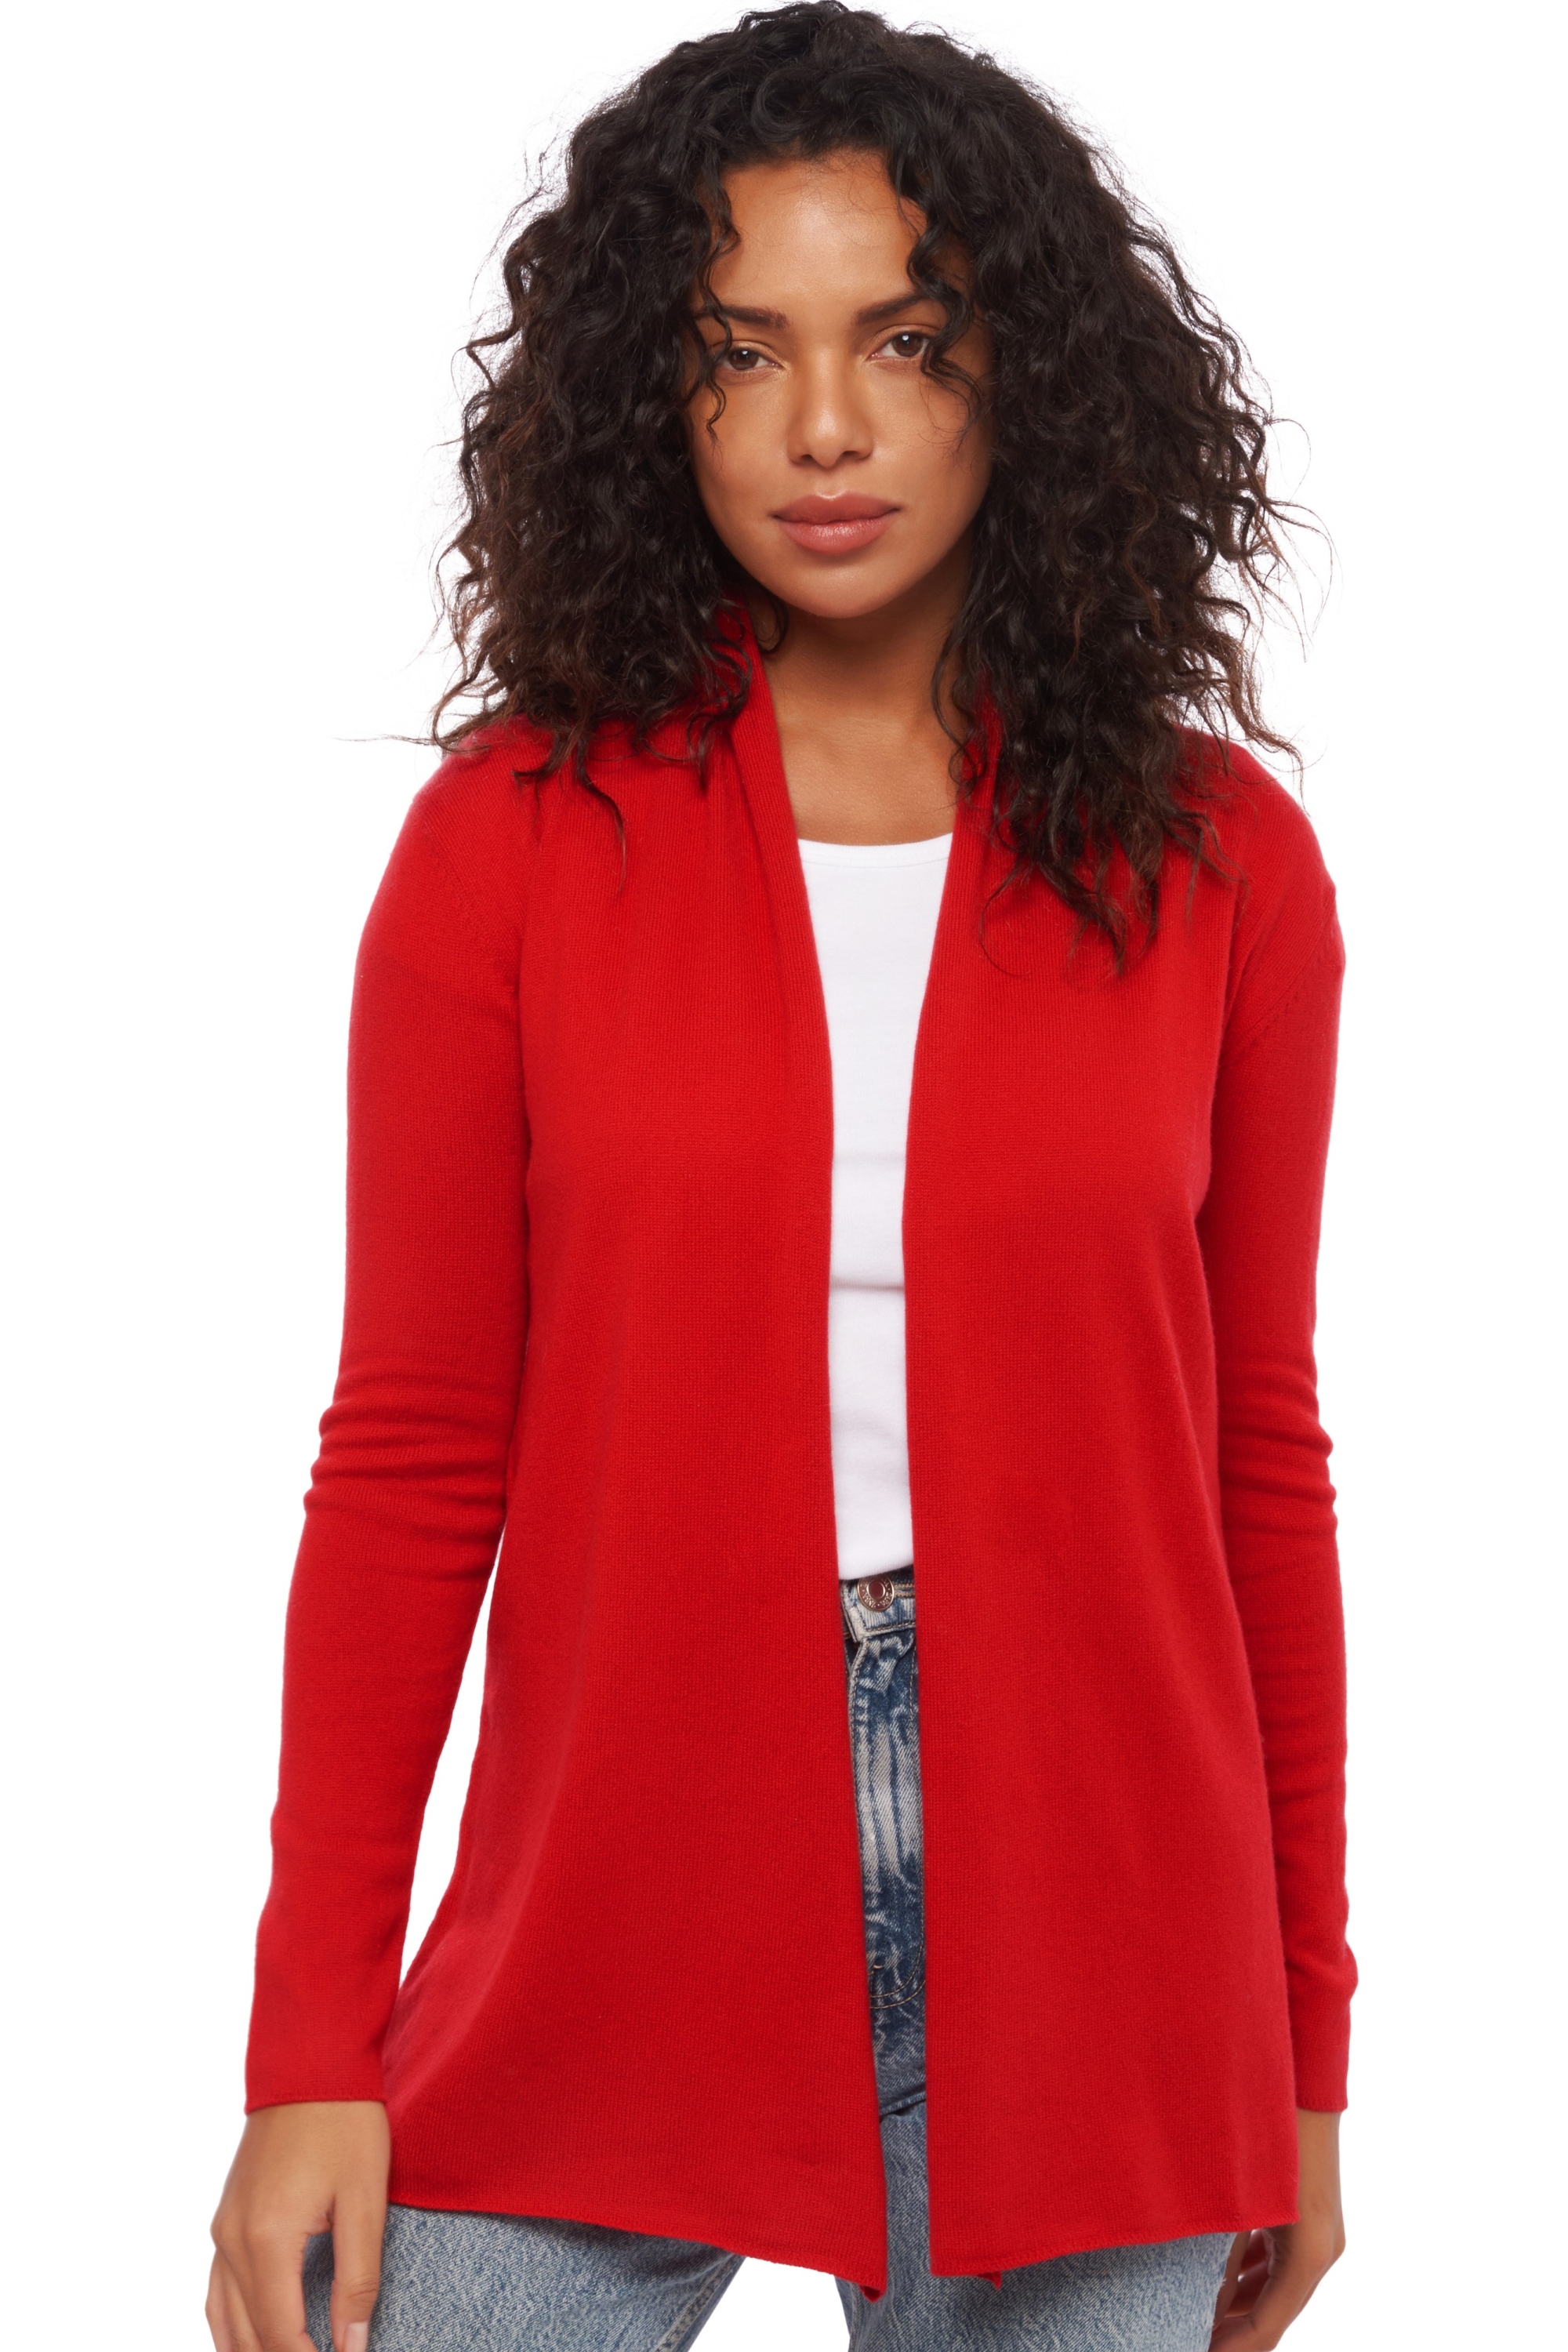 Cashmere ladies cardigans pucci blood red 4xl